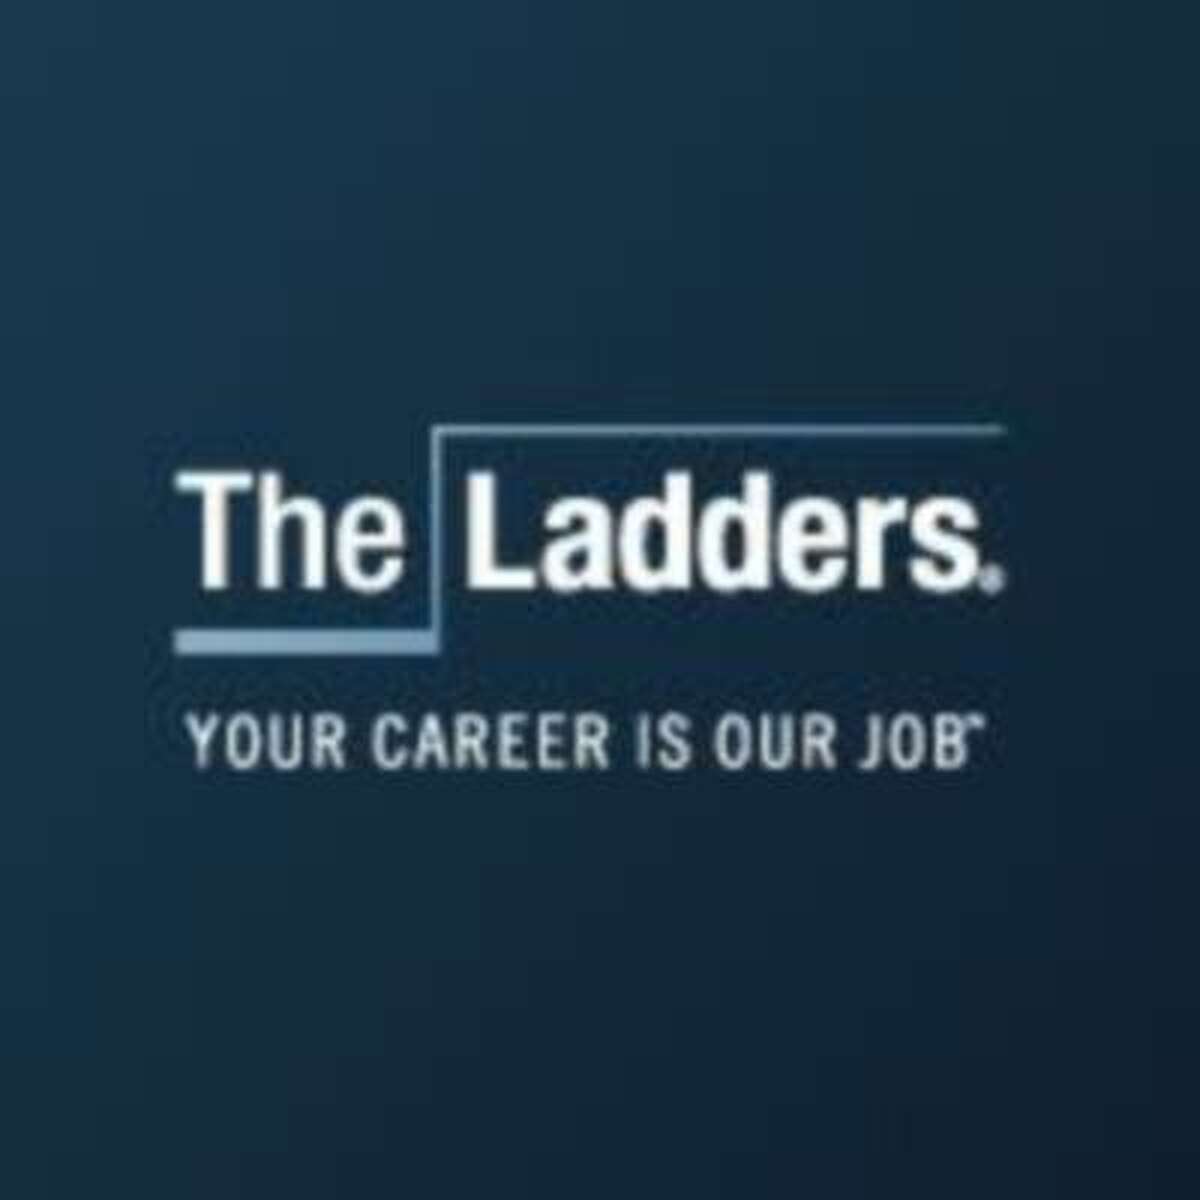 A new free iPhone app called TheLadders takes a different approach and sends a list of job opportunities to users based on their employment profile and career goals.